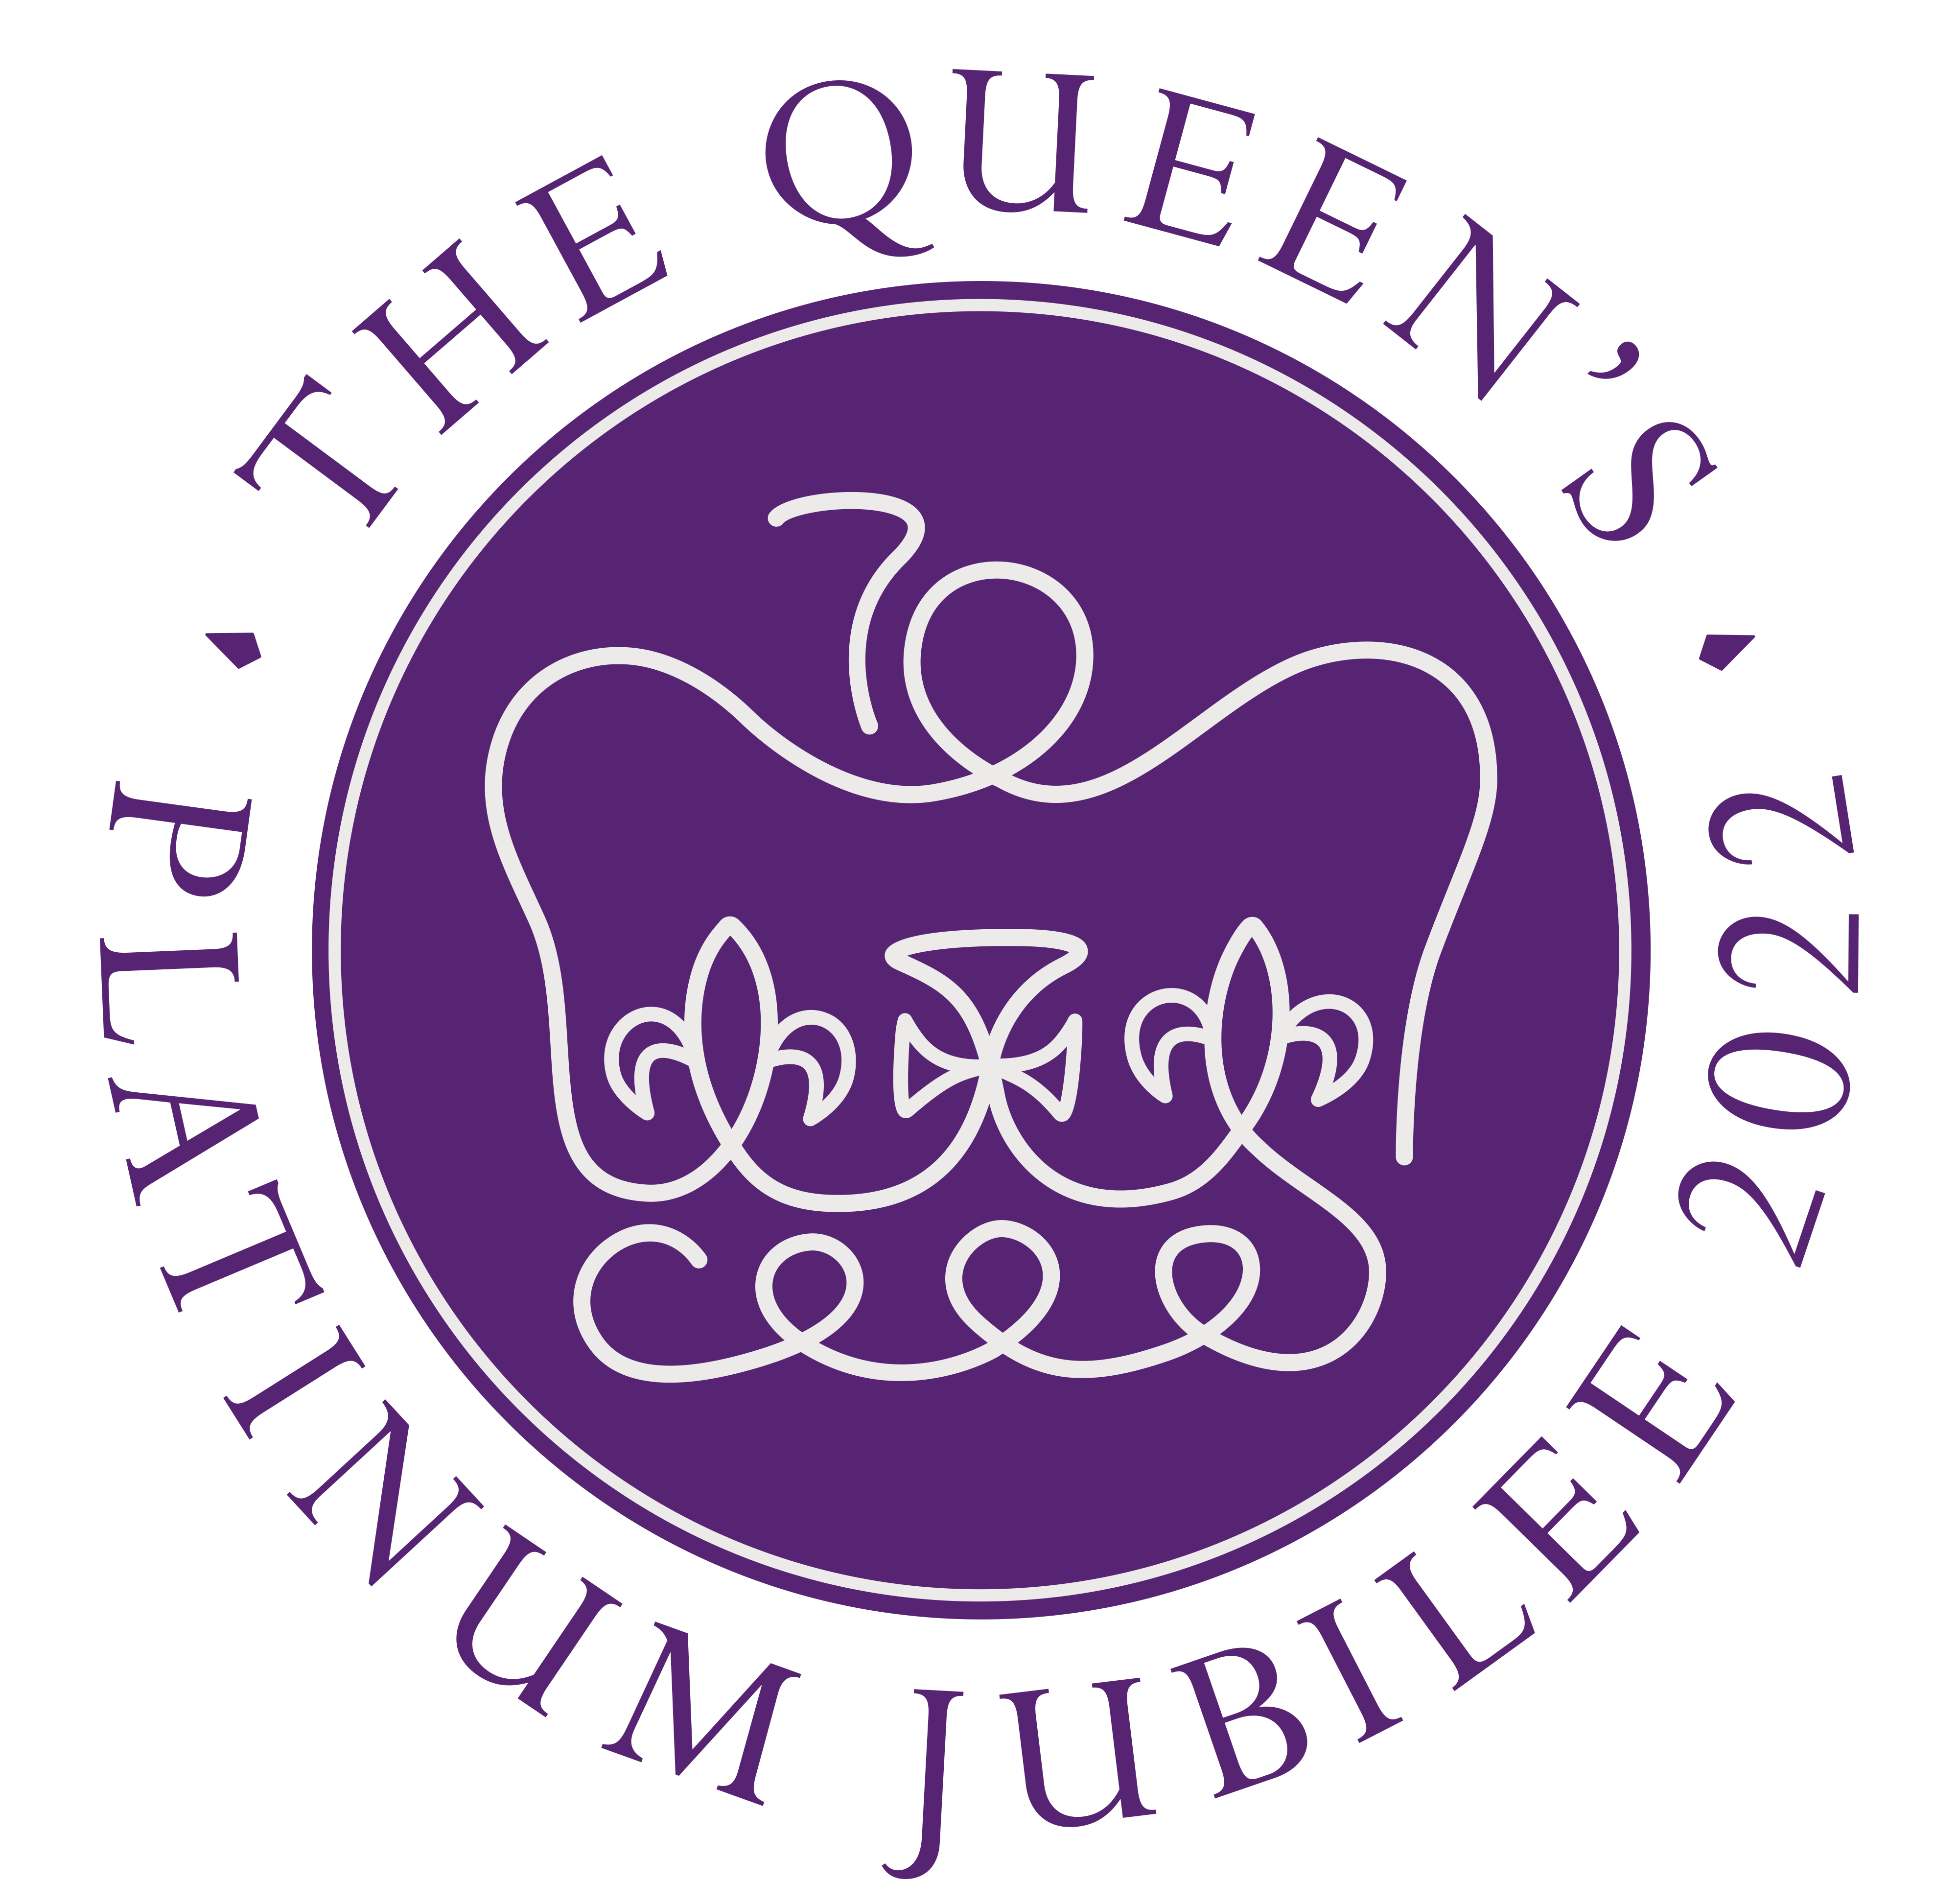 Notes of second meeting to discuss The Queen’s Platinum Jubilee celebrations